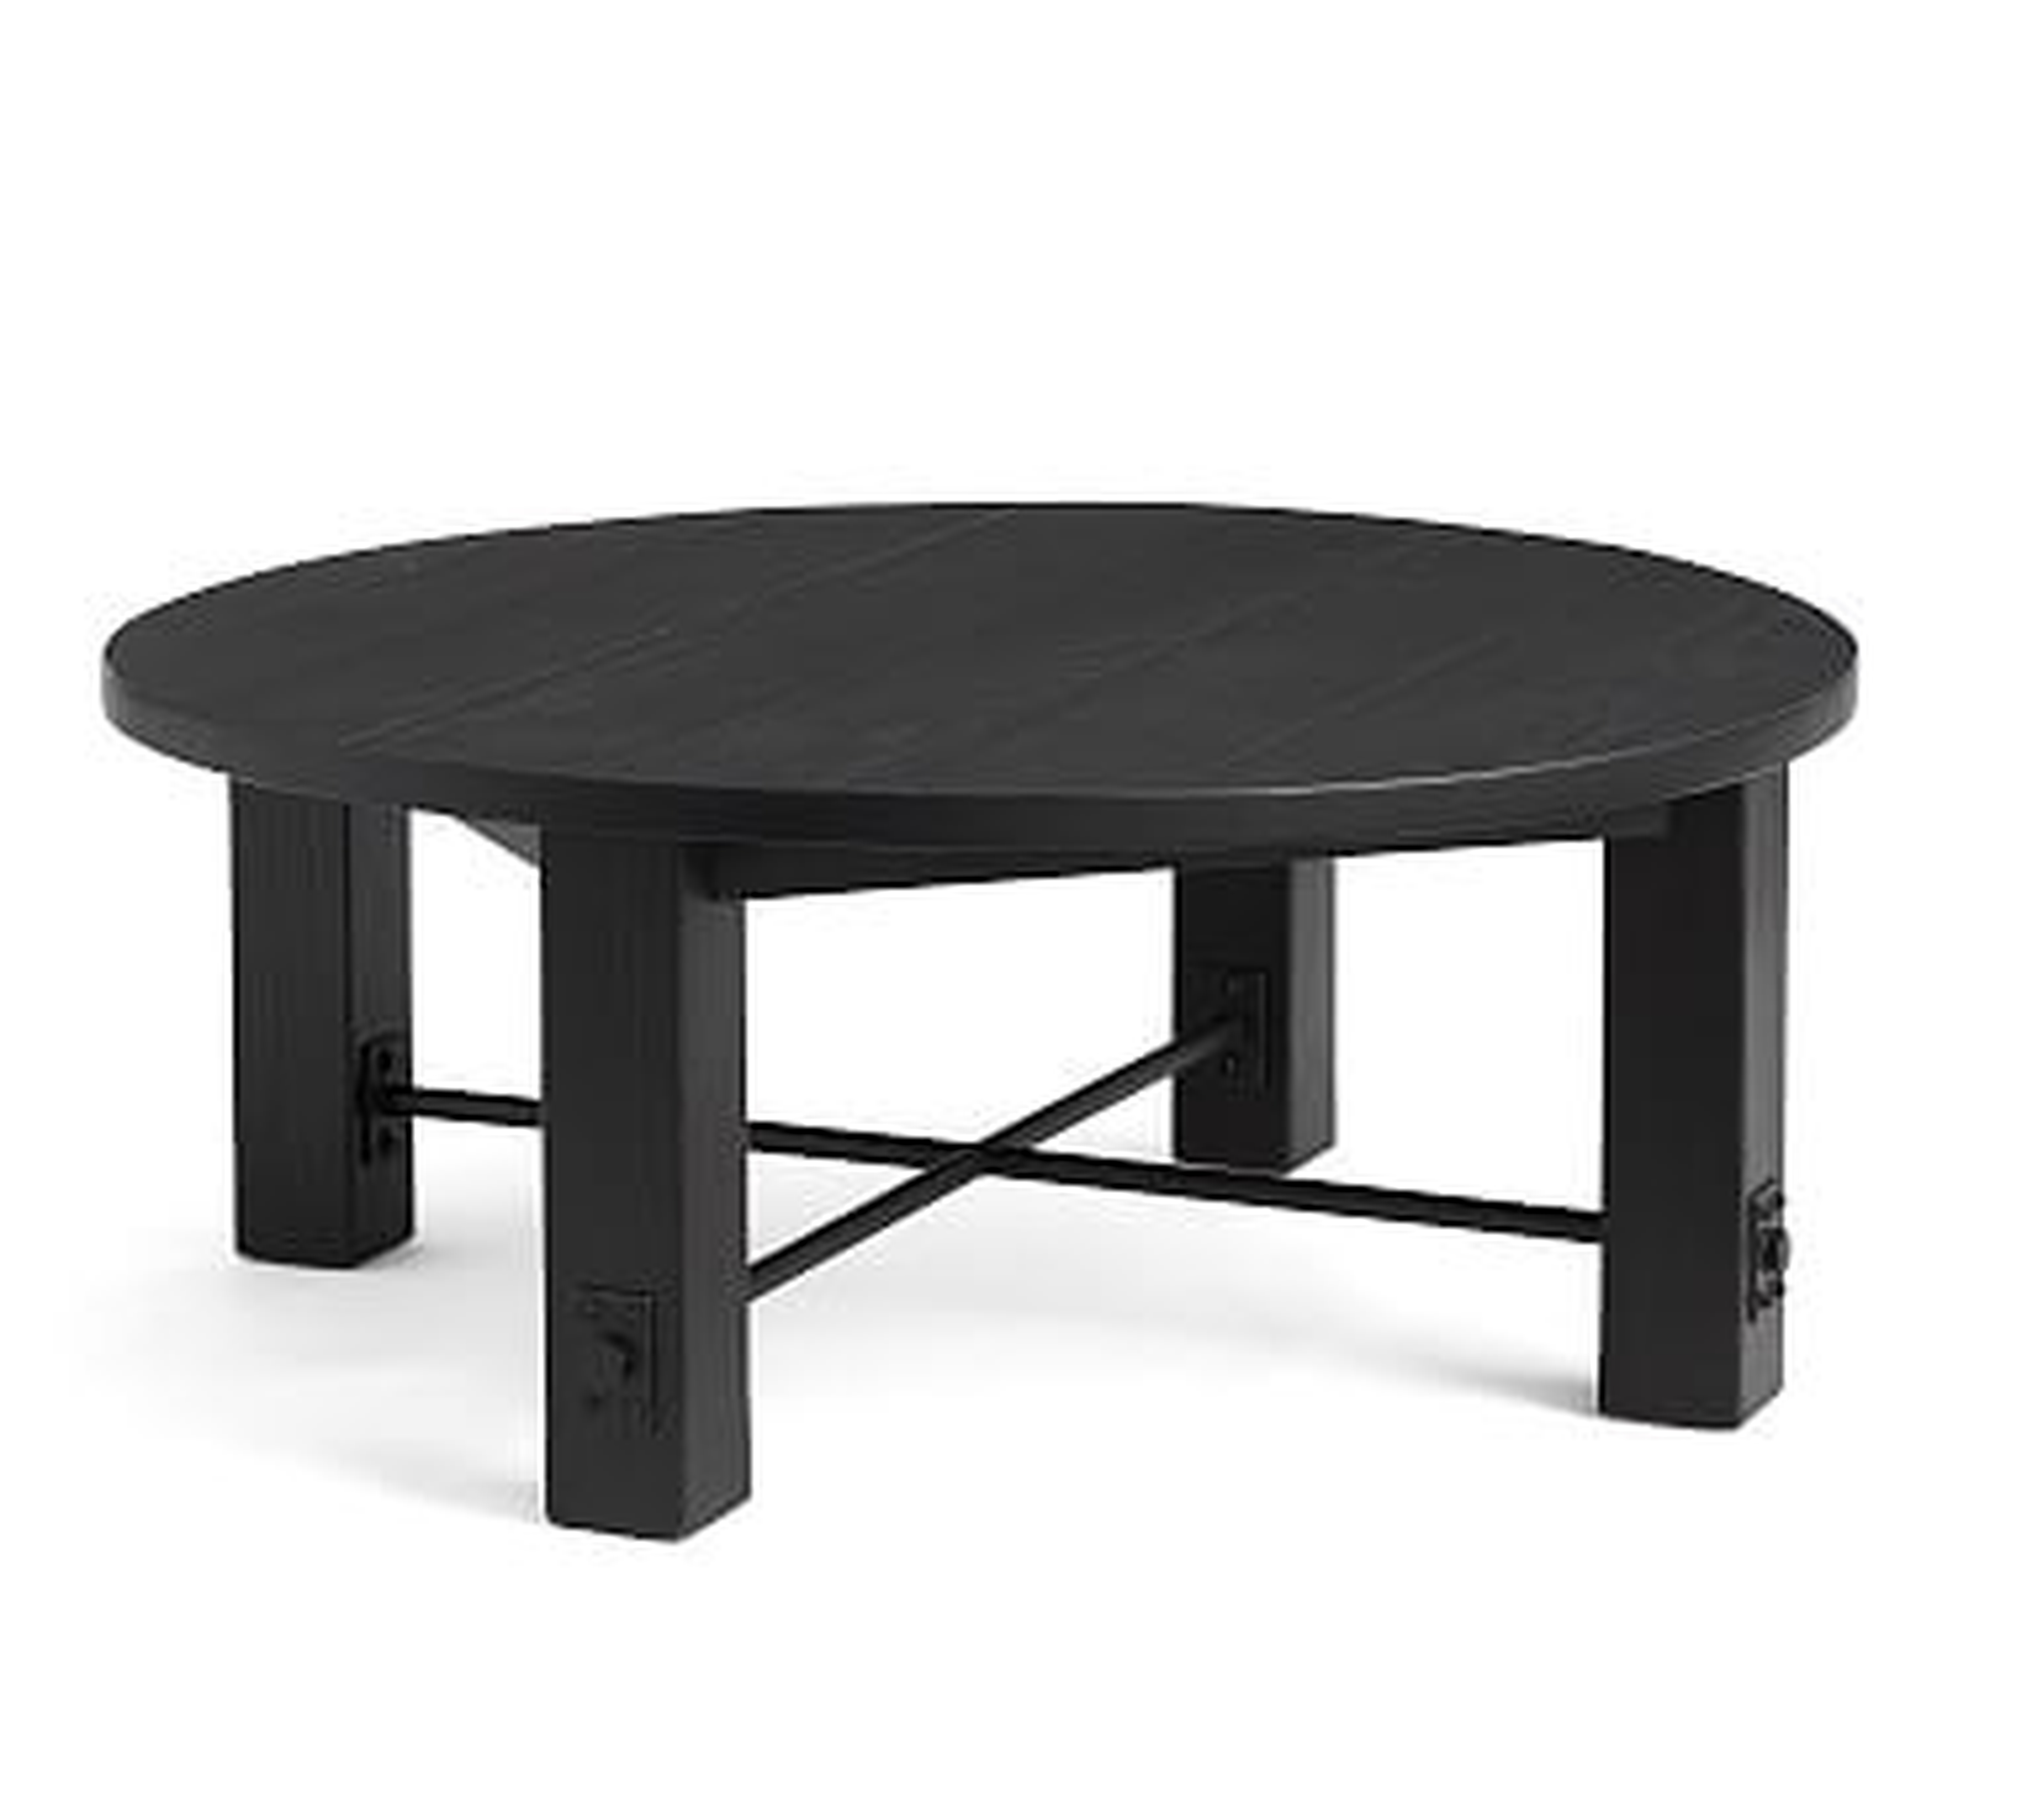 Benchwright Round Coffee Table, Blackened Oak, 42"L - Pottery Barn